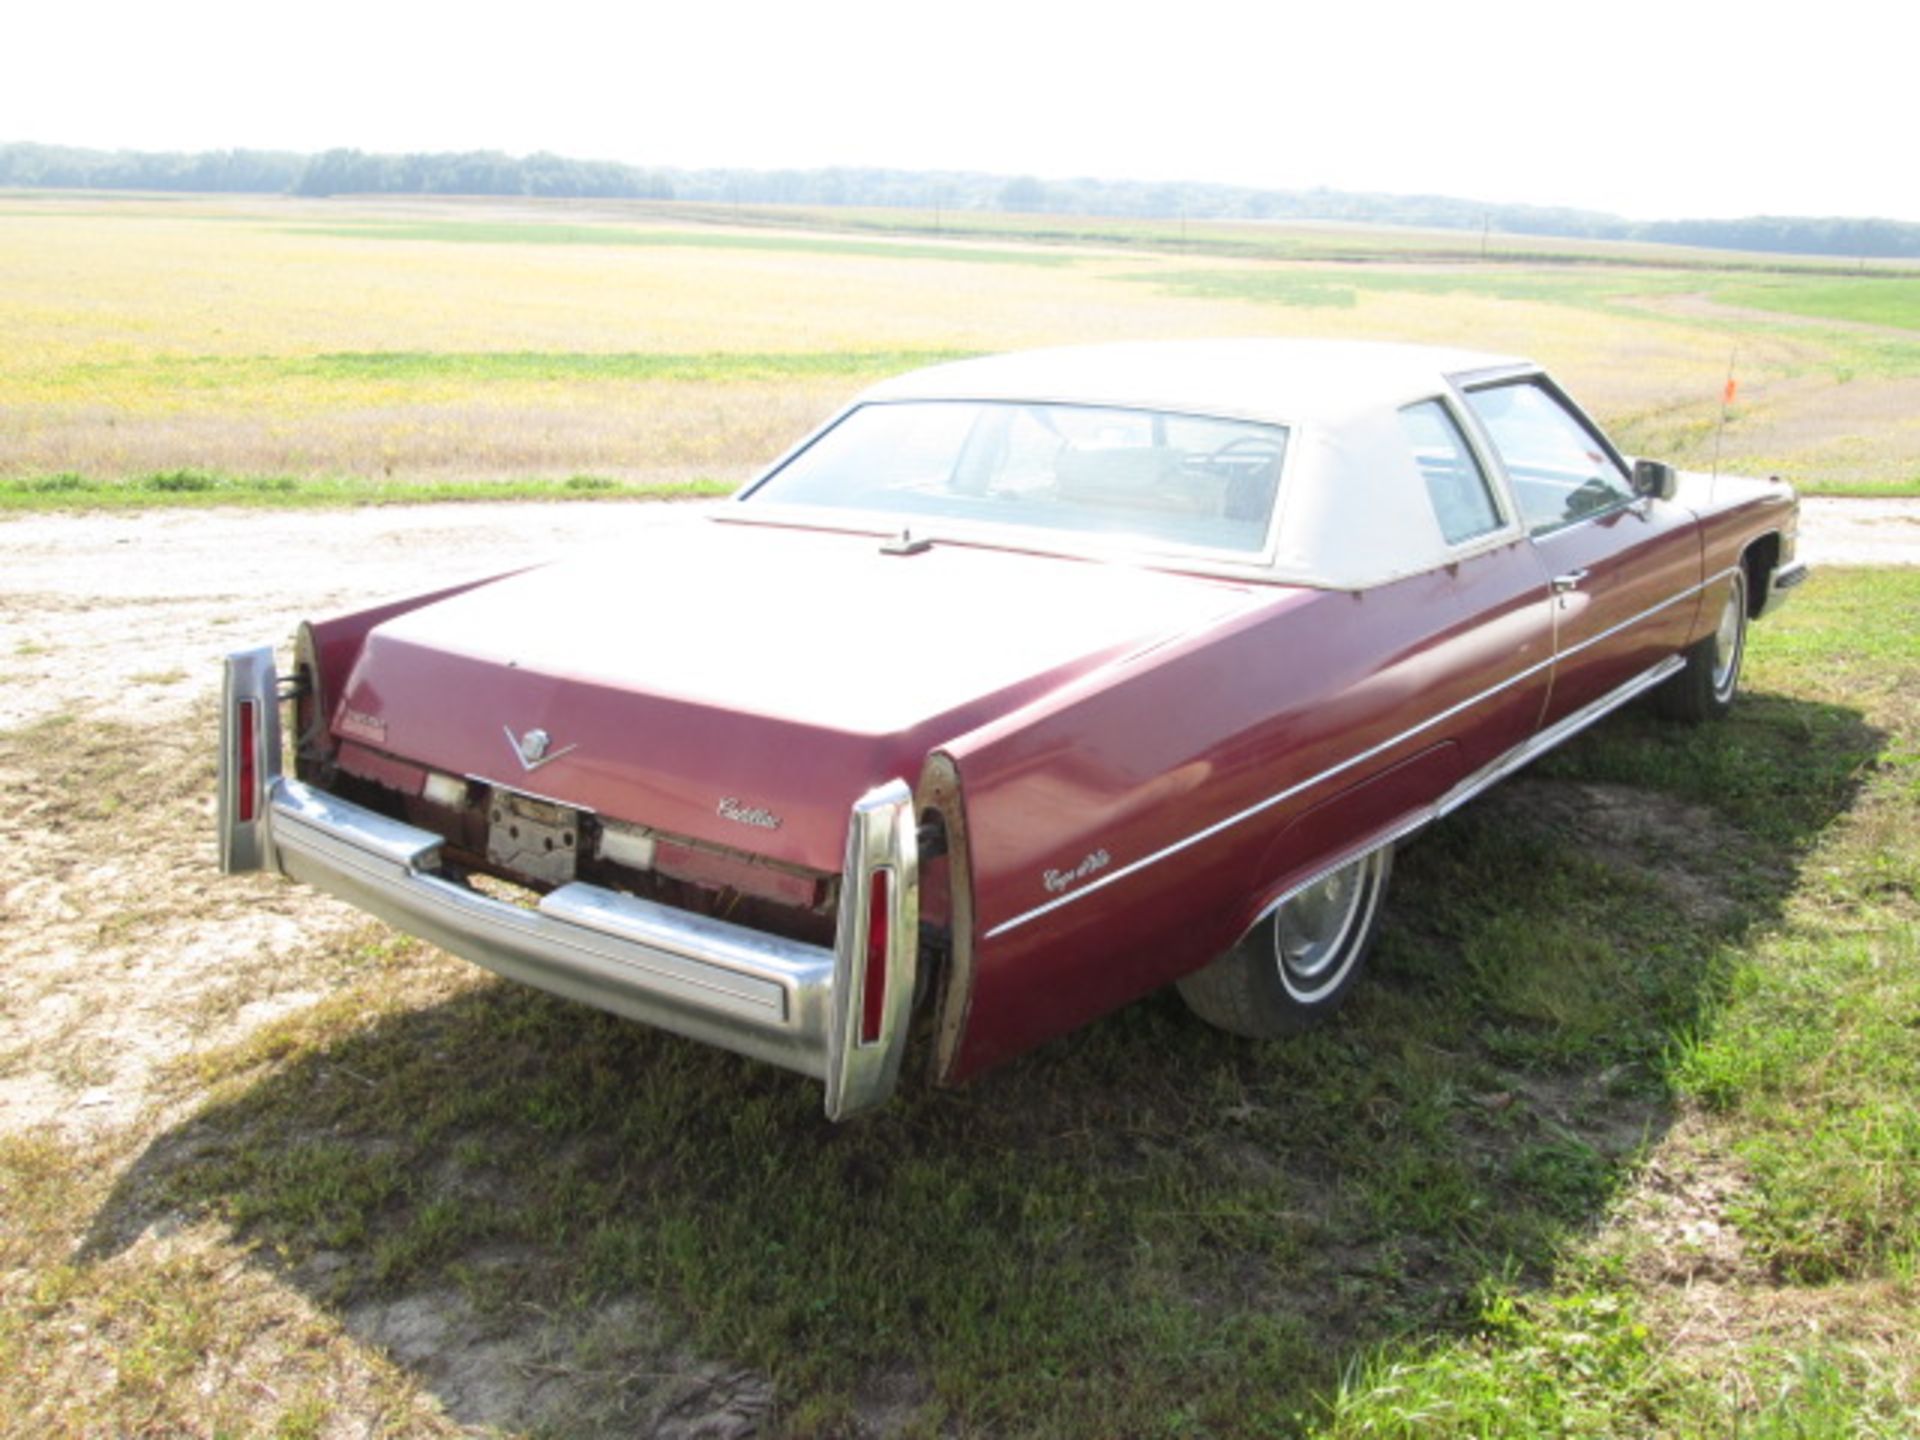 '74 CADILLAC COUPE DEVILLE, NON RUNNING - Image 3 of 15